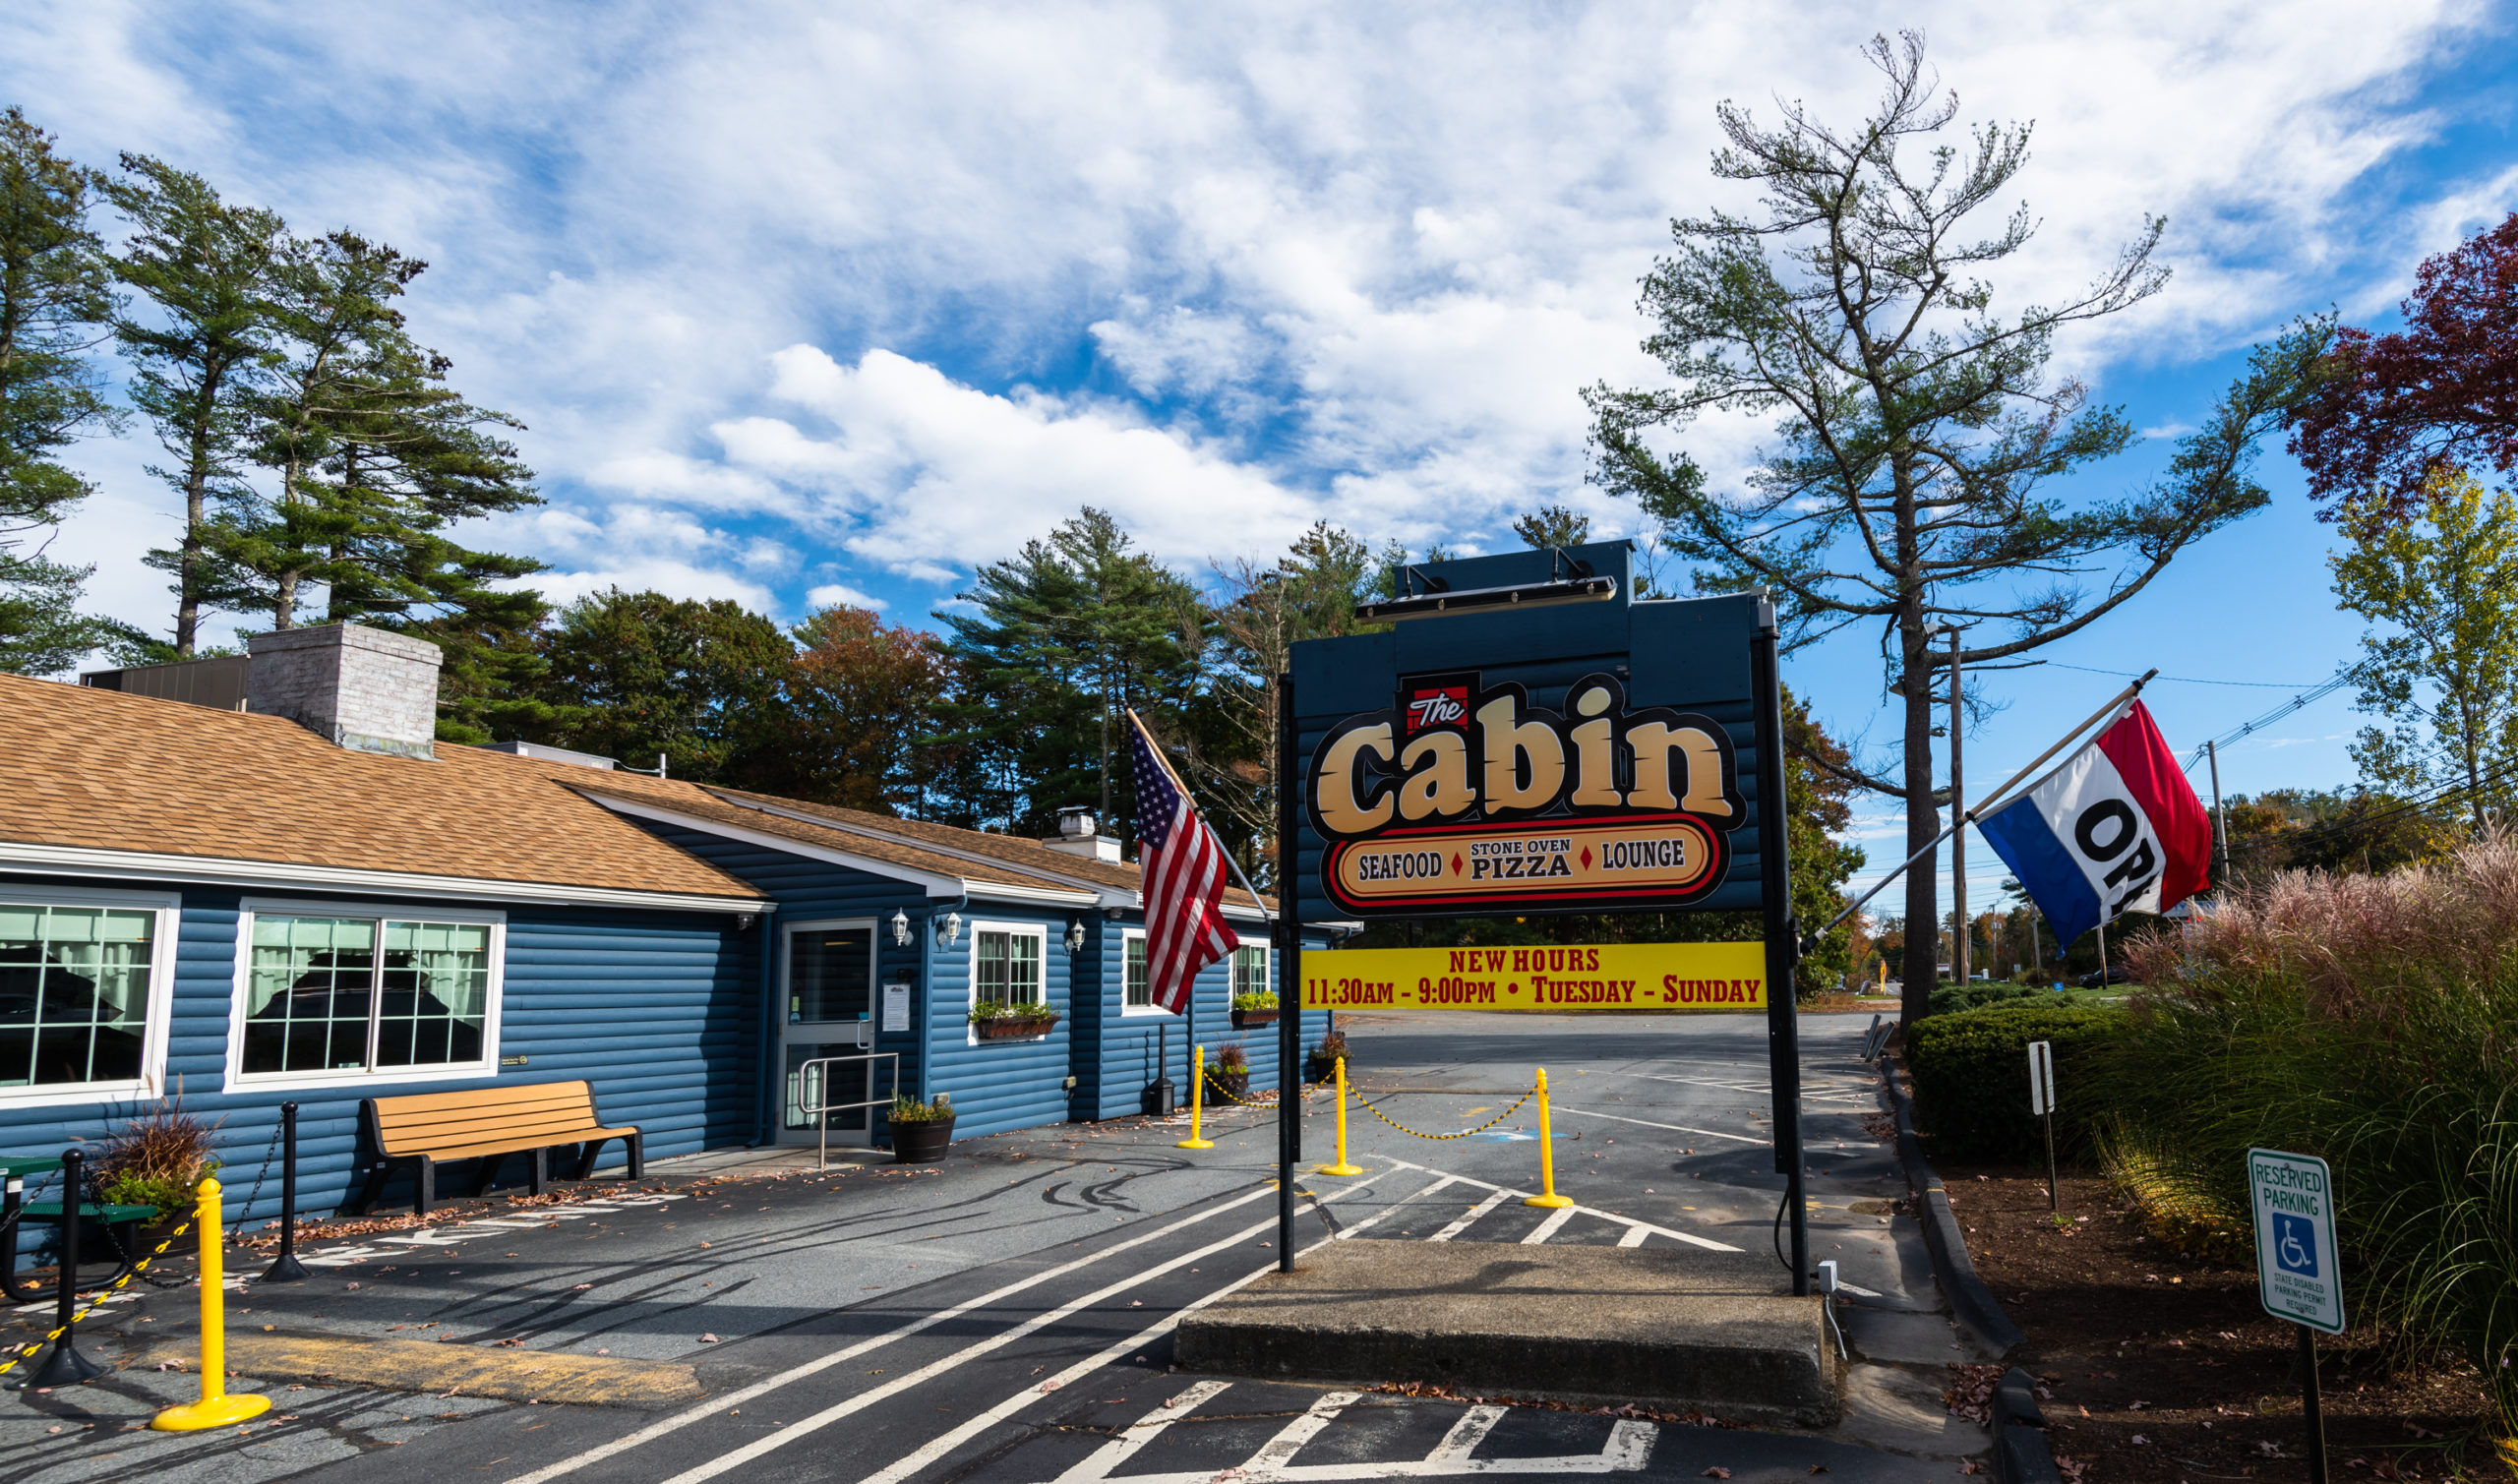 The Cabin Restaurant Review: Tons of Gluten Free Options